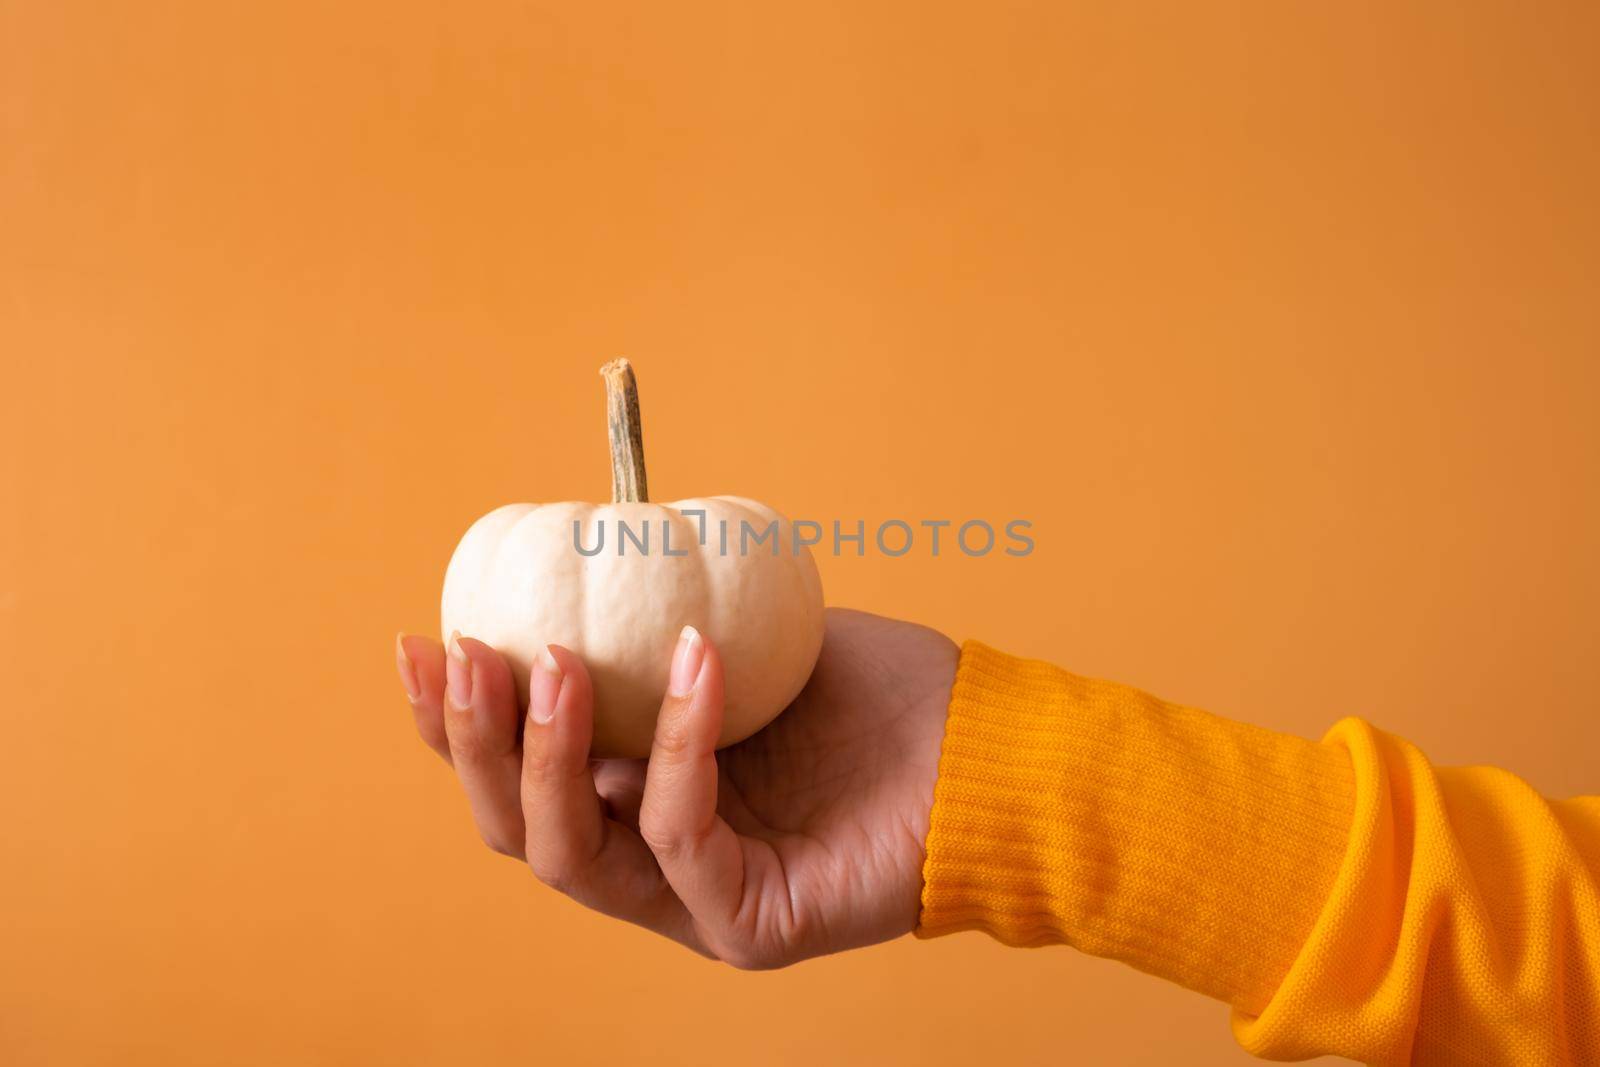 A small decorative white pumpkin in a woman's hand in a sweater on an orange background